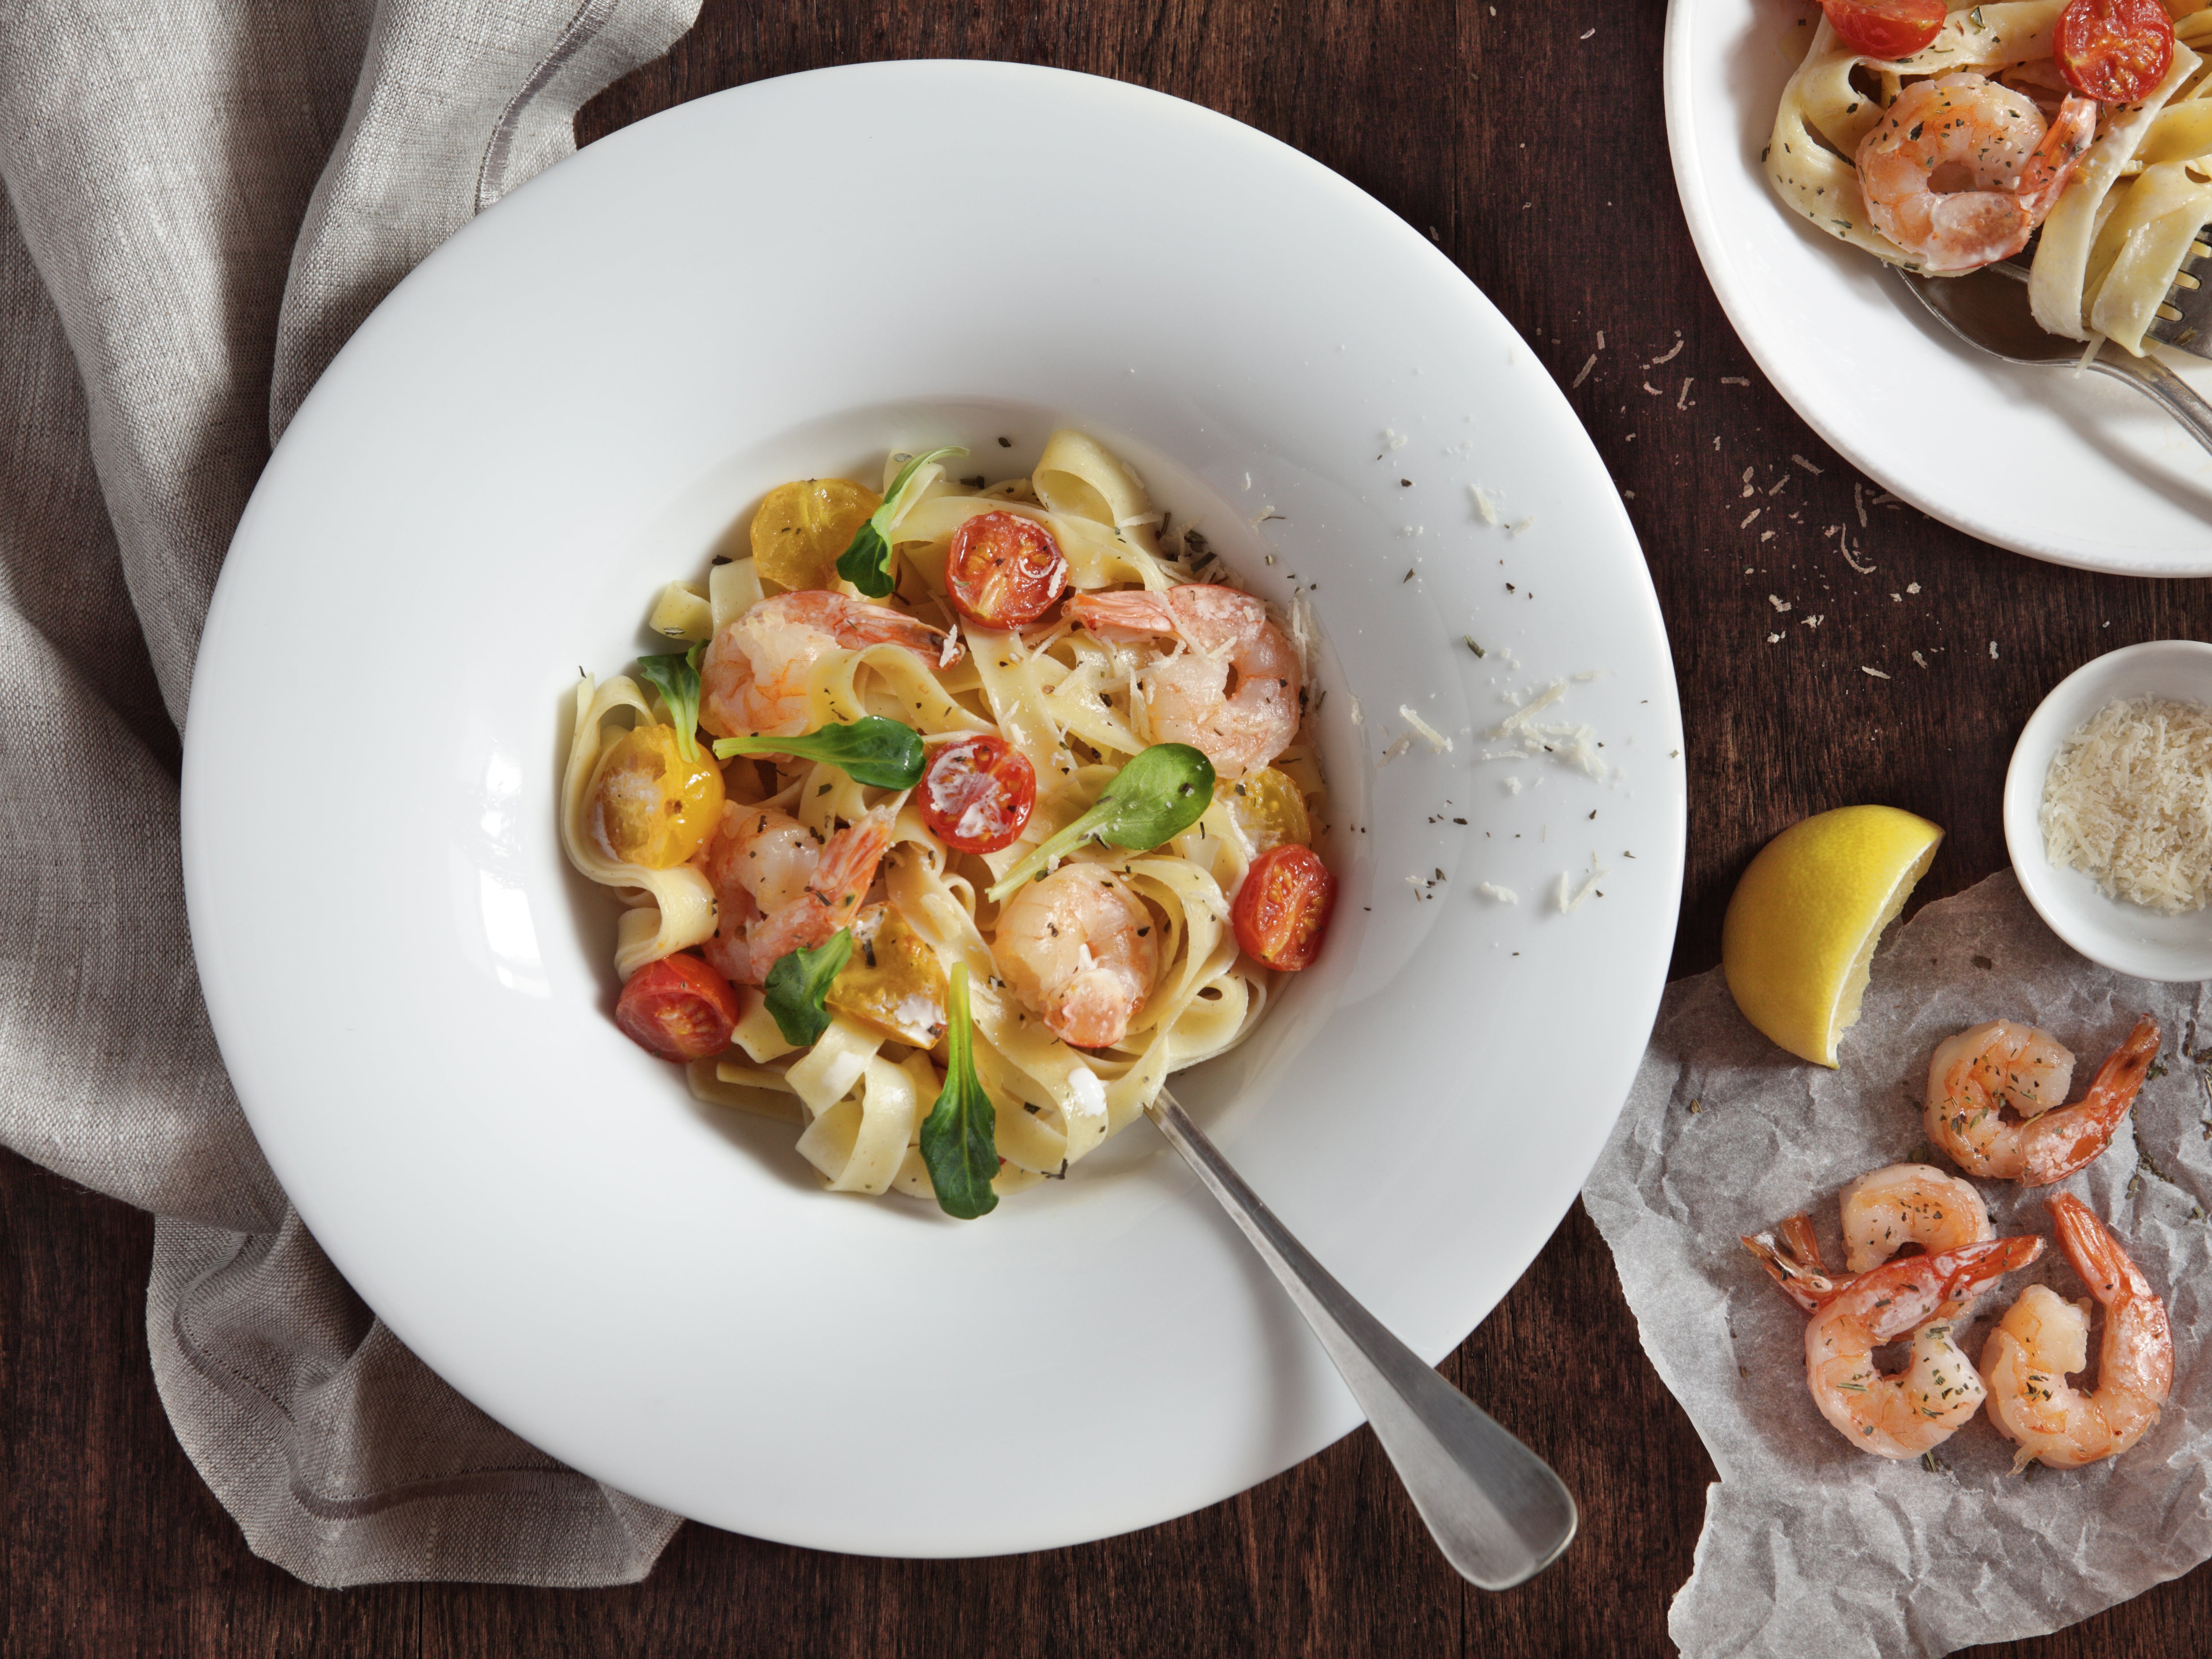 Frozen prawns are a freezer staple that can be counted on to save dinner any night